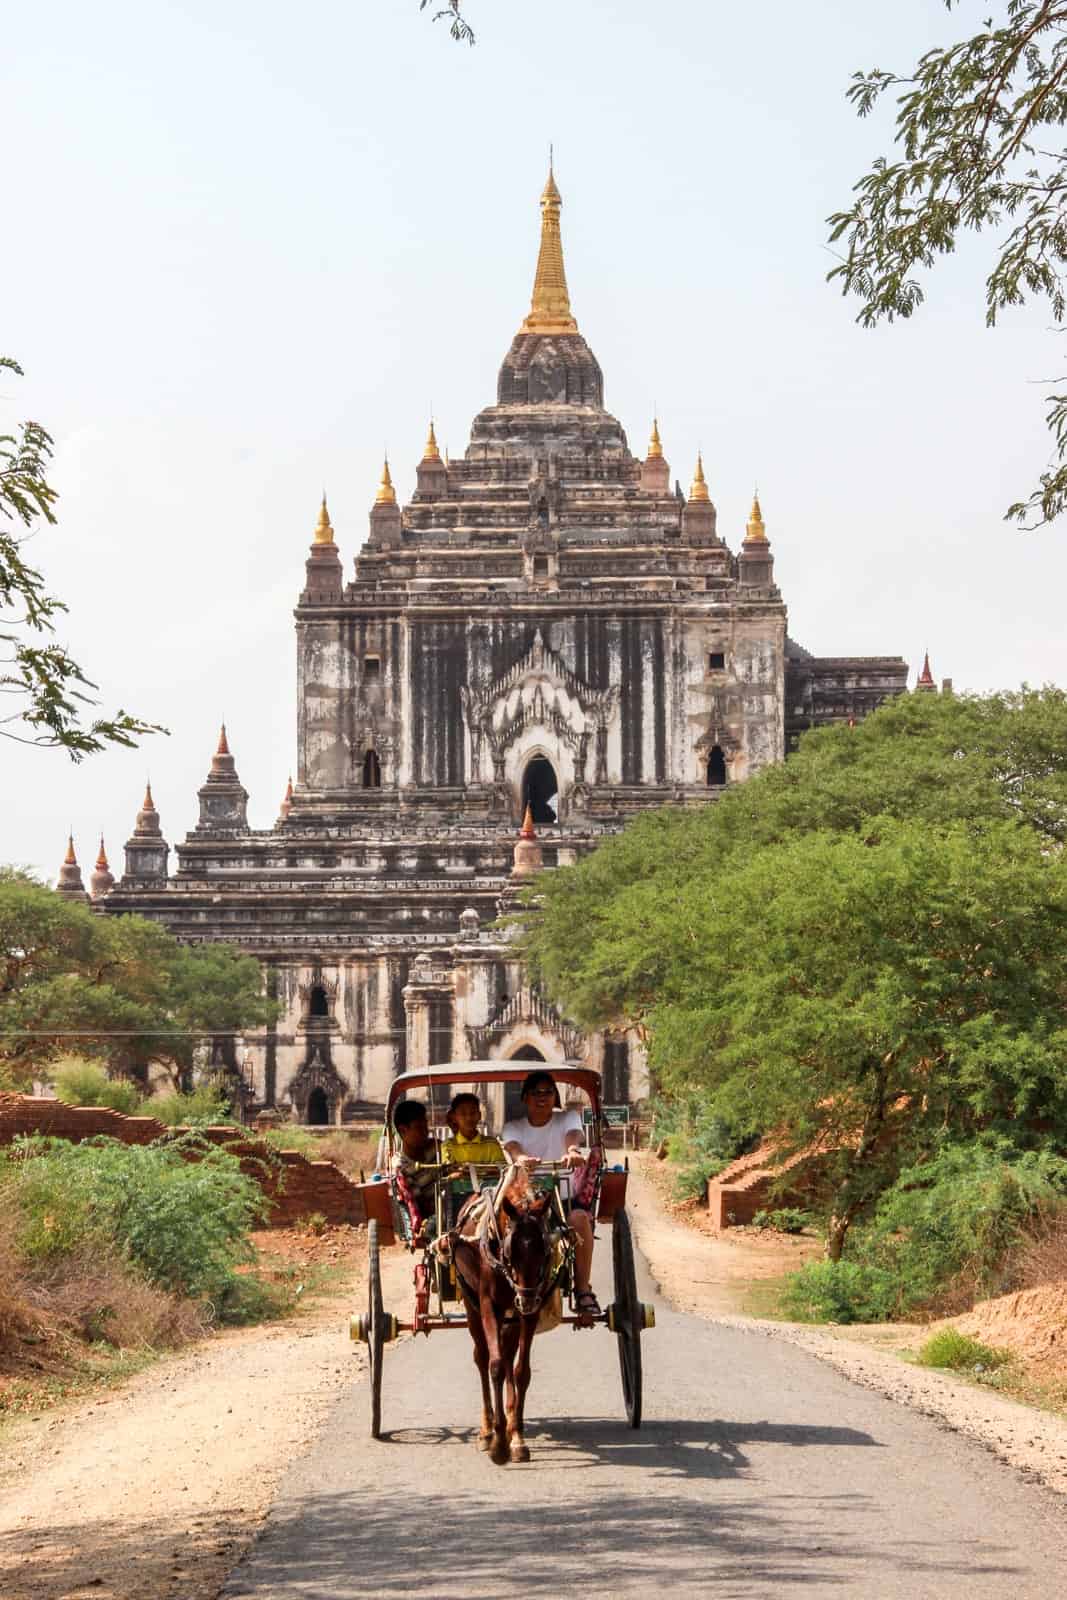 A woman and two children riding in a horse drawn cart in front of a tiered, gold spired temple in Bagan. 